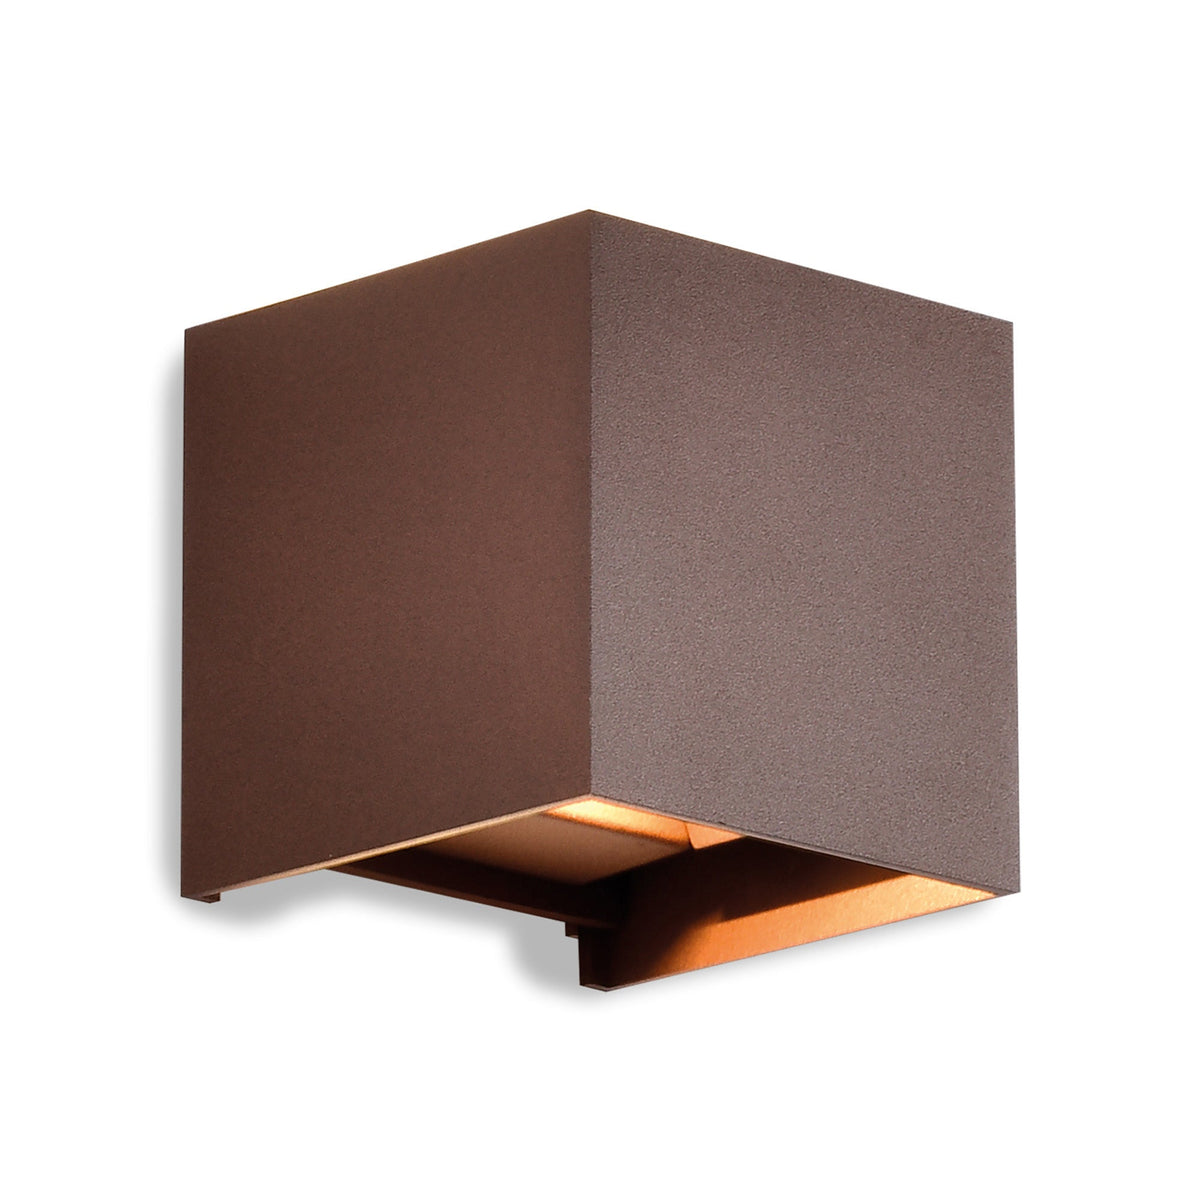 Davos Square Wall Lamp, 12W LED, 3000K, 1100lm, IP54, Corten, 3yrs Warranty - Cusack Lighting